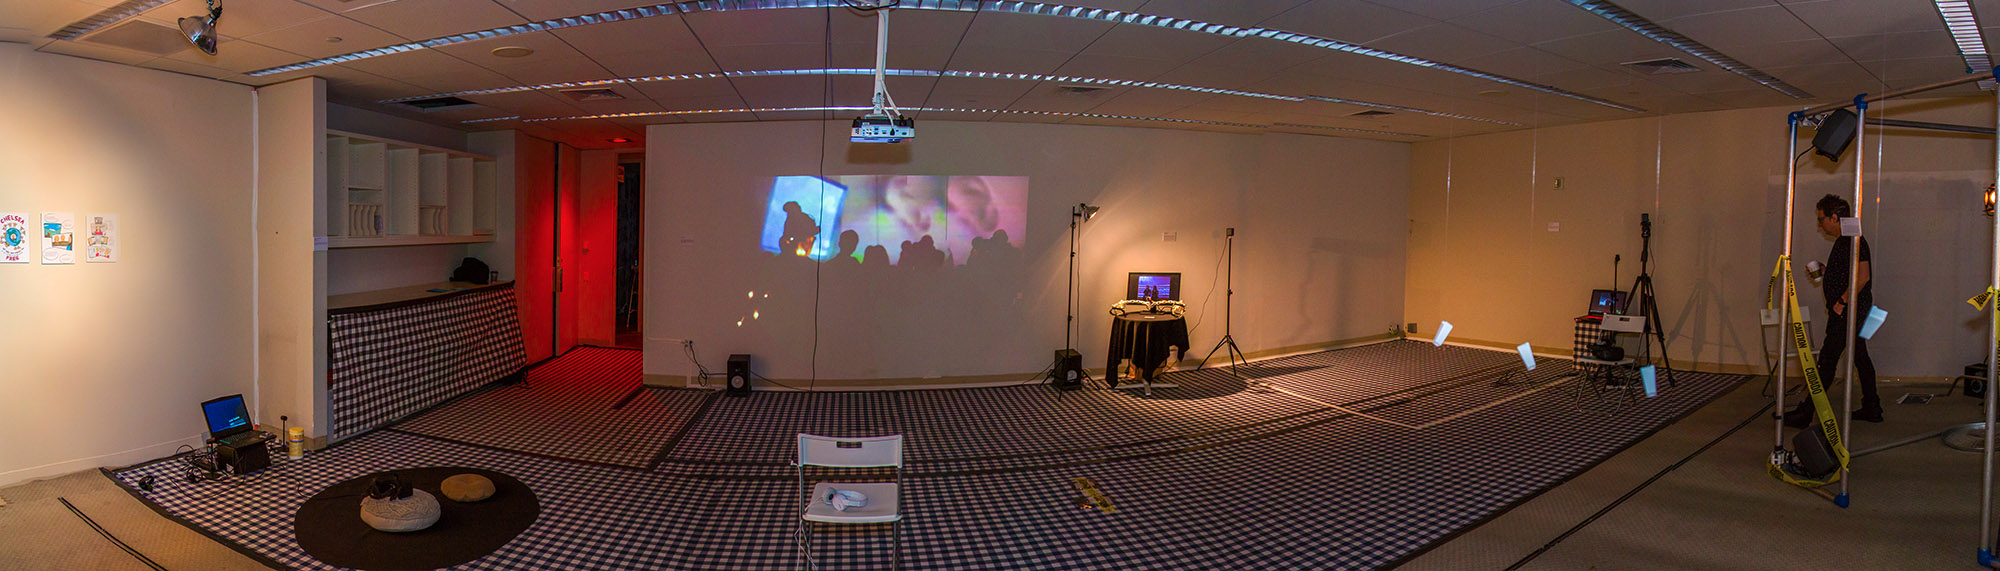 A wide shot of a room with various digtal art installations